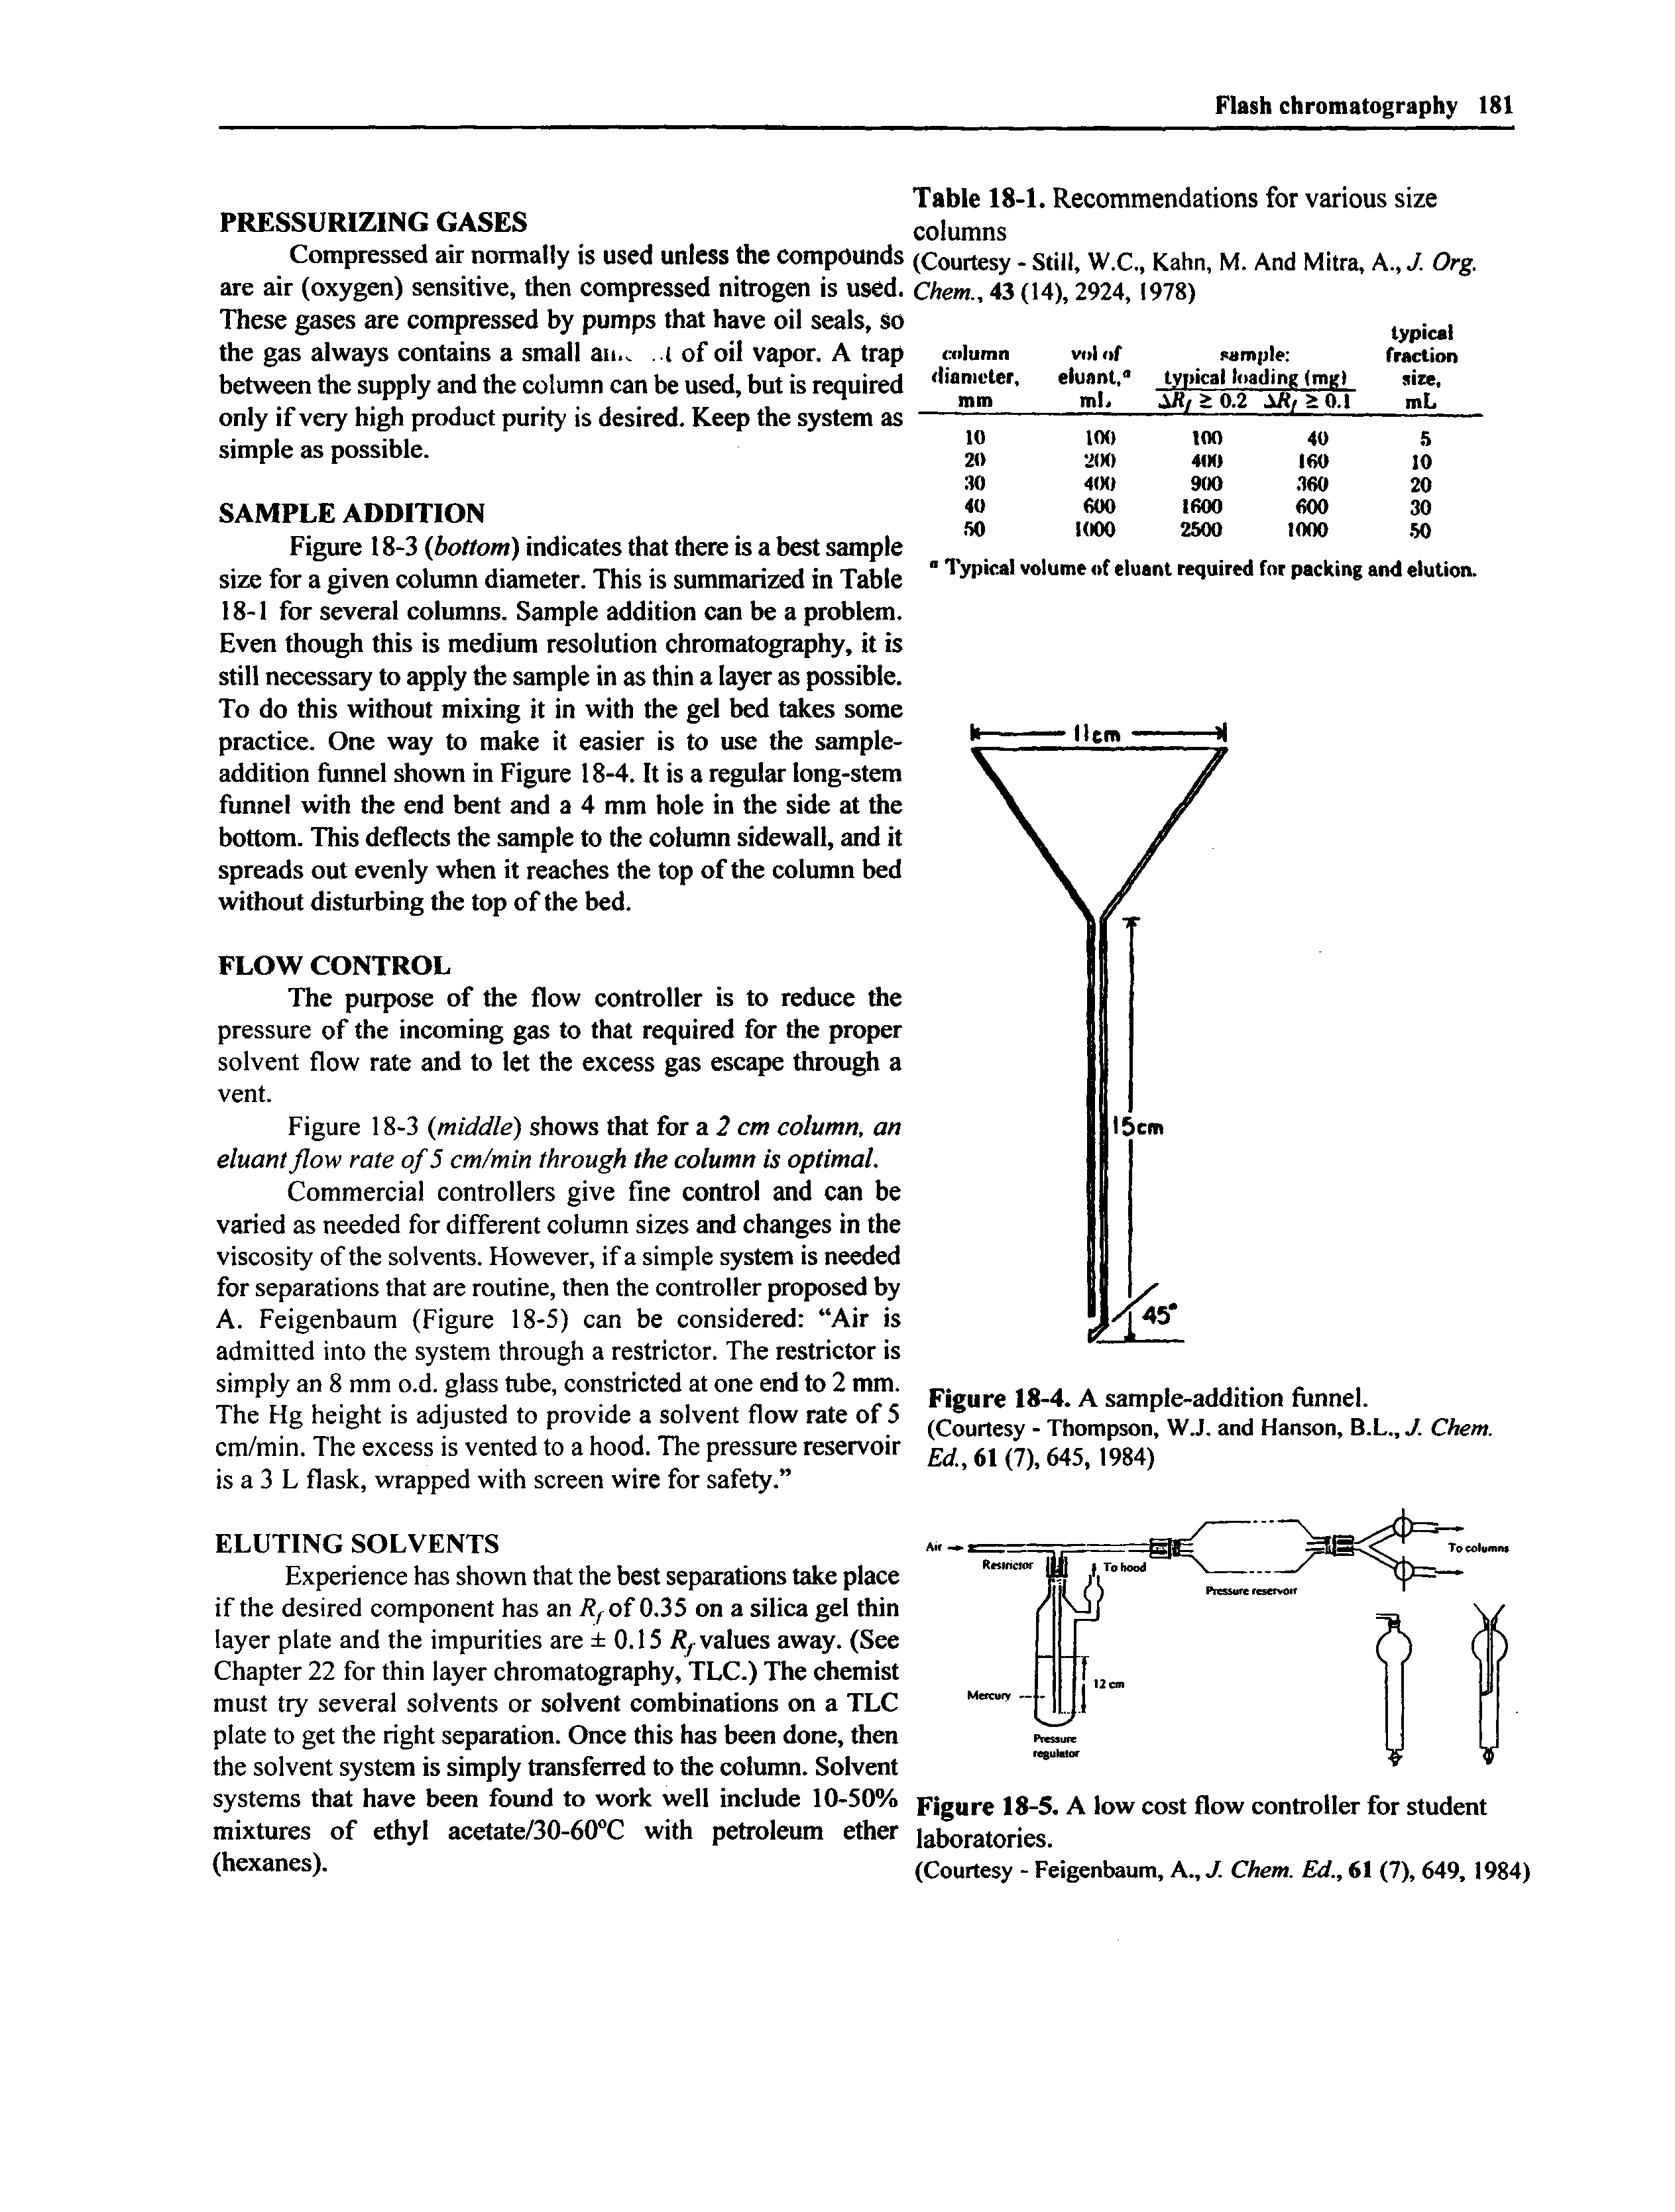 Figure 18-3 bottom) indicates that there is a best sample size for a given column diameter. This is summarized in Table 18-1 for several columns. Sample addition can be a problem. Even though this is medium resolution chromatography, it is still necessary to apply the sample in as thin a layer as possible. To do this without mixing it in with the gel bed takes some practice. One way to make it easier is to use the sample-addition funnel shown in Figure 18-4. It is a regular long-stem funnel with the end bent and a 4 mm hole in the side at the bottom. This deflects the sample to the column sidewall, and it spreads out evenly when it reaches the top of the column bed without disturbing the top of the bed.